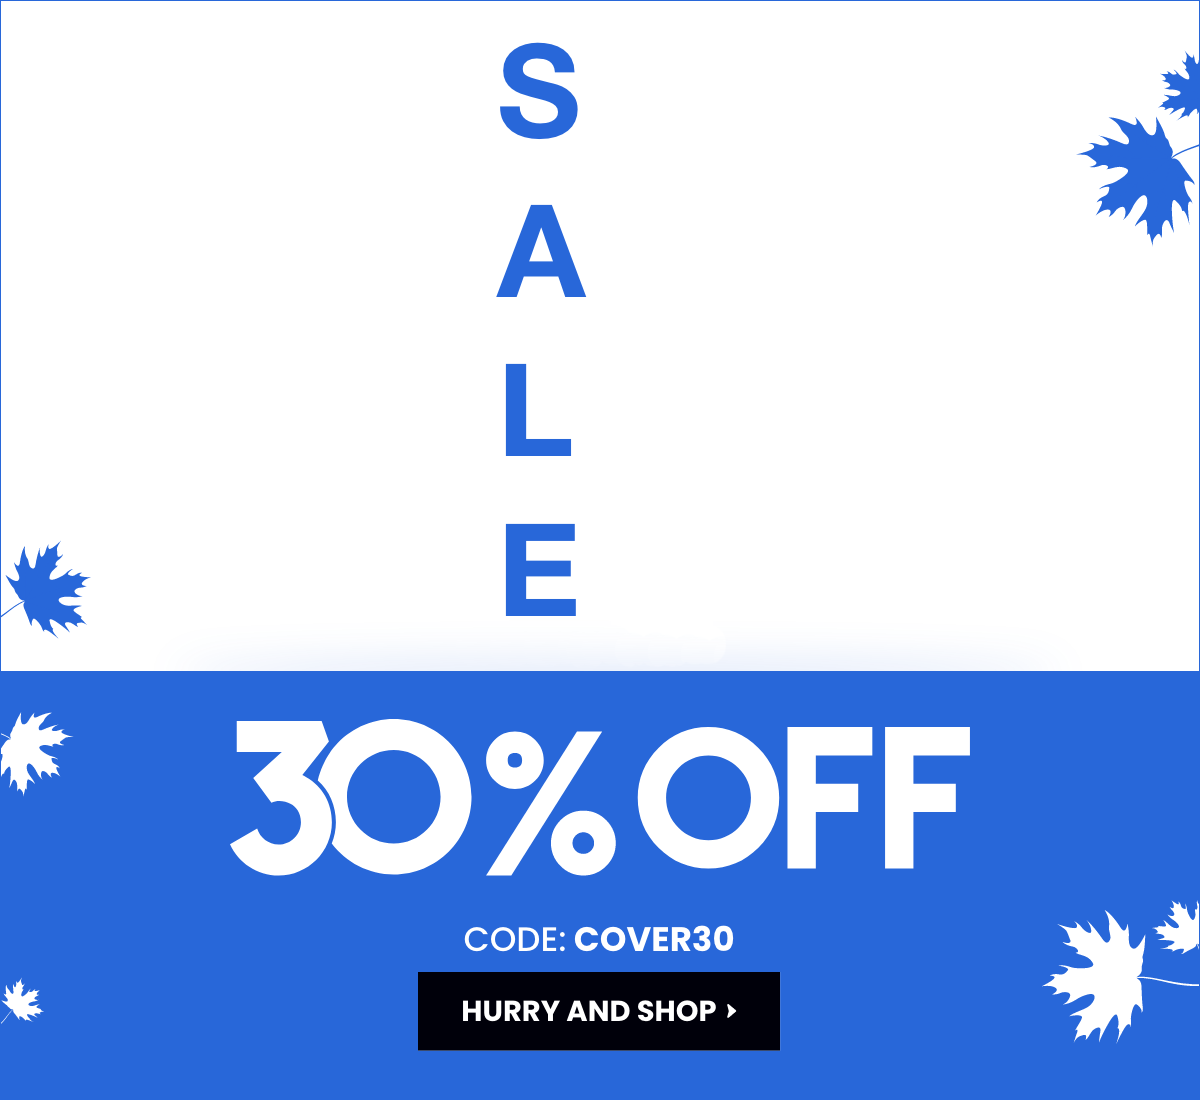 Here's Sale Last reminder | 30% Off